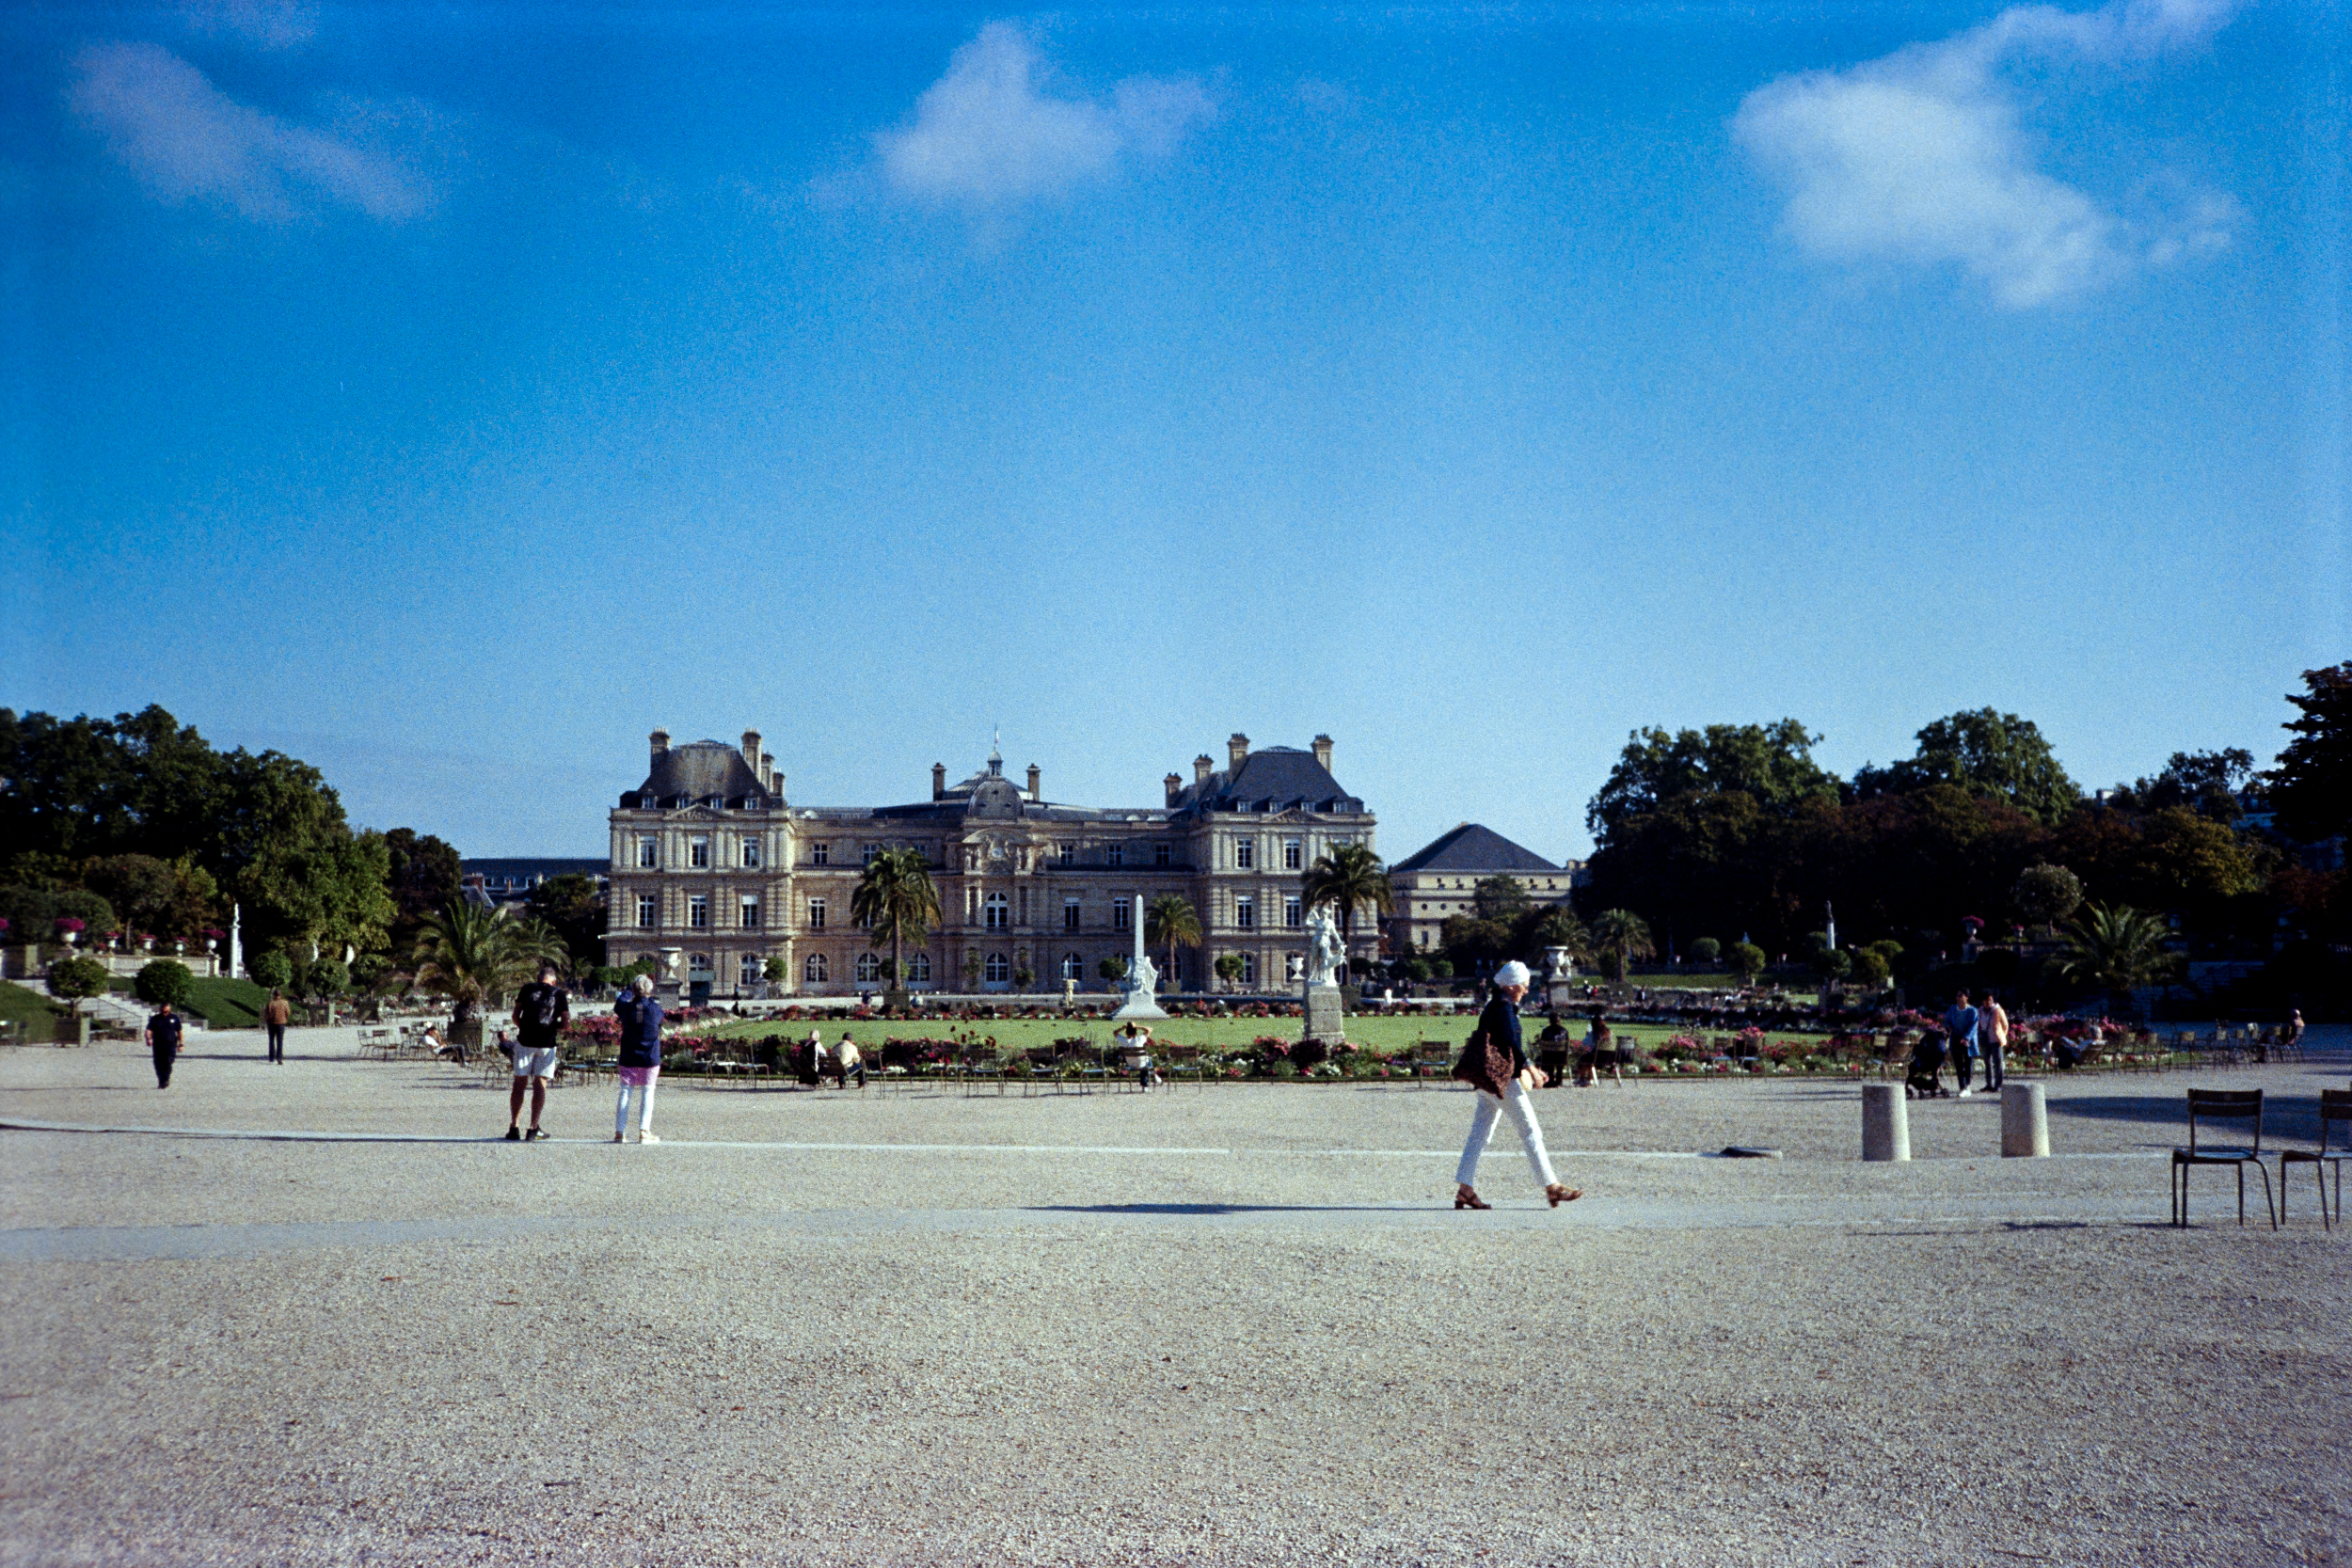 A film photo of the Jardin du Luxembourg in Paris. It is summer and there are many people walking around.